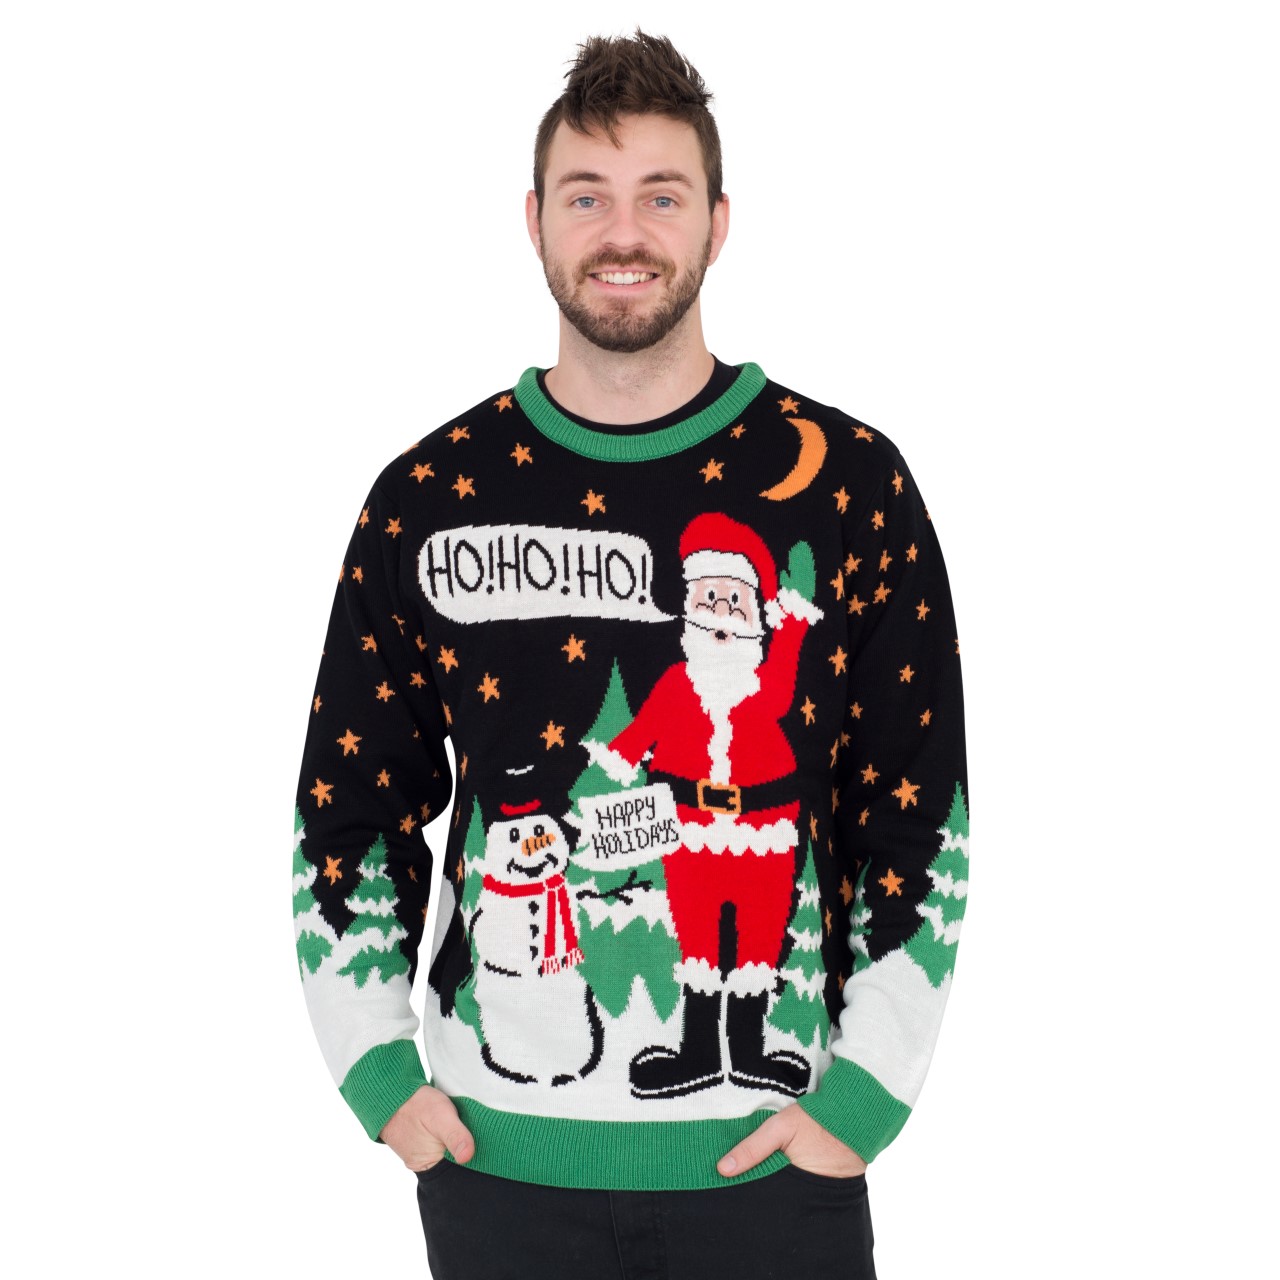 Ho Ho Ho It’s #!@%ING Merry Christmas,New Products : uglyschristmassweater.com